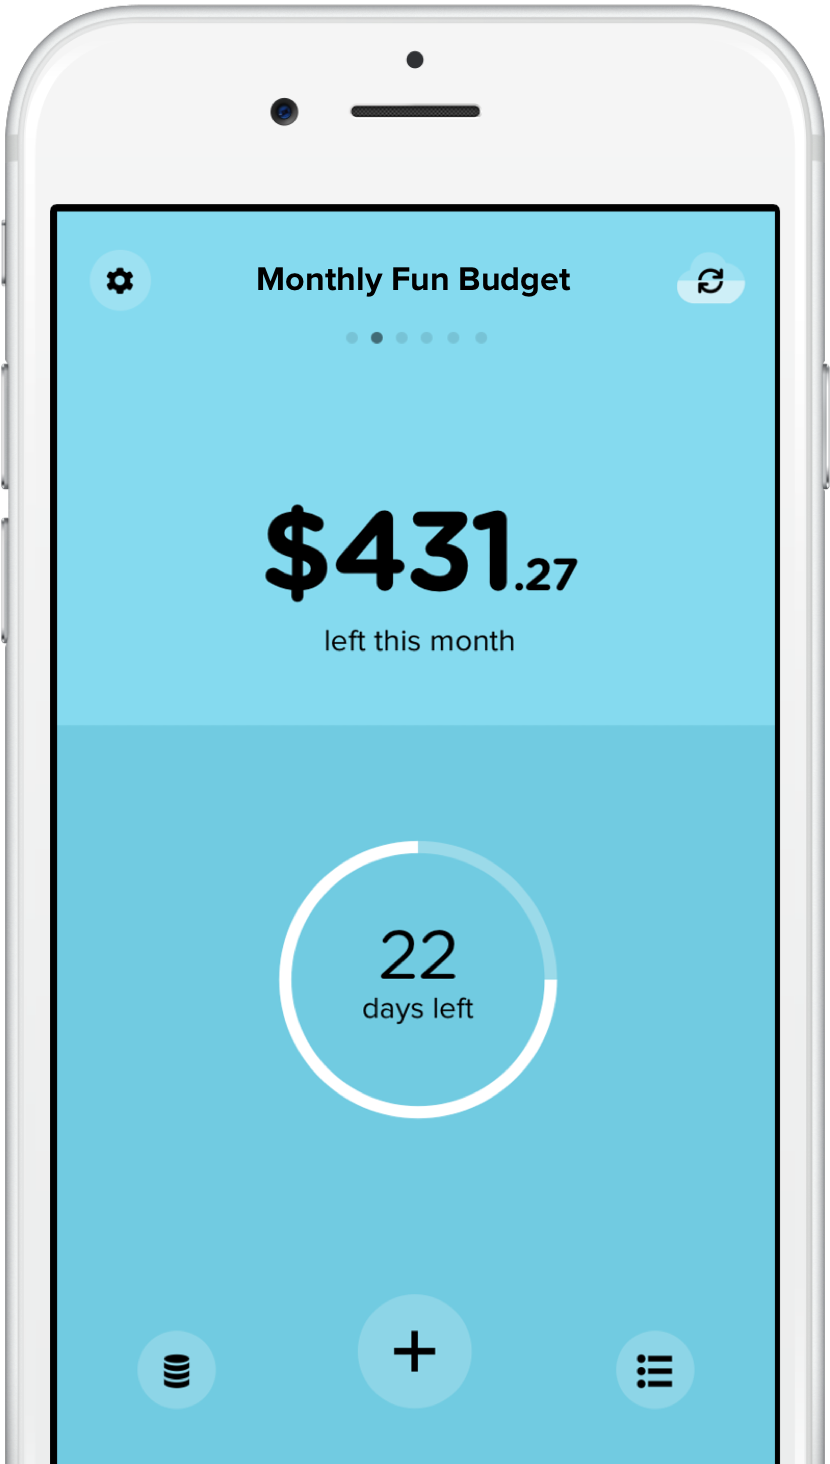 Pennies for iPhone - A super simple, personal money budget manager app